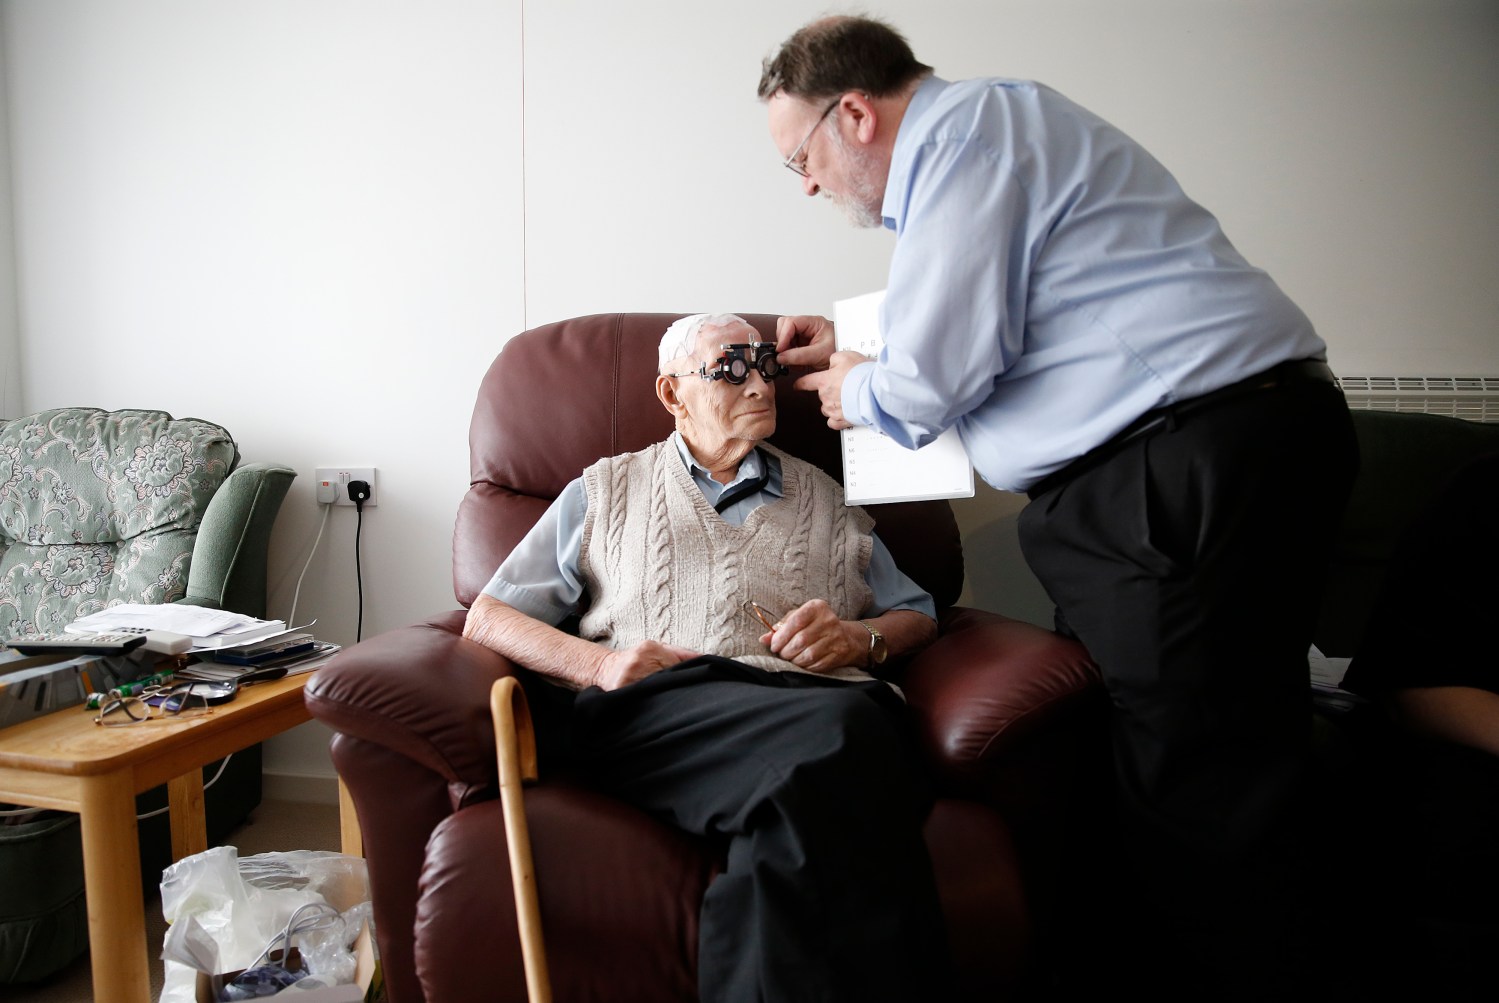 Resident Ernie Mayes, 89, has his eyes checked by Optometrist Ray Small in his flat at the Colbrooke House care facility run by a private company working on behalf of the local government and housing association in southeast London February 13, 2015. The provision of care for those who can no longer look after themselves but do not require a place in hospital is one of the biggest problems facing the state-funded National Health Service. The involvement of the private sector in critical services remains a contentious issue in Britain after large outsourcers failed in previous high profile contracts. REUTERS/Suzanne Plunkett (BRITAIN - Tags: POLITICS HEALTH SOCIETY) - LM1EB2J0R3L01